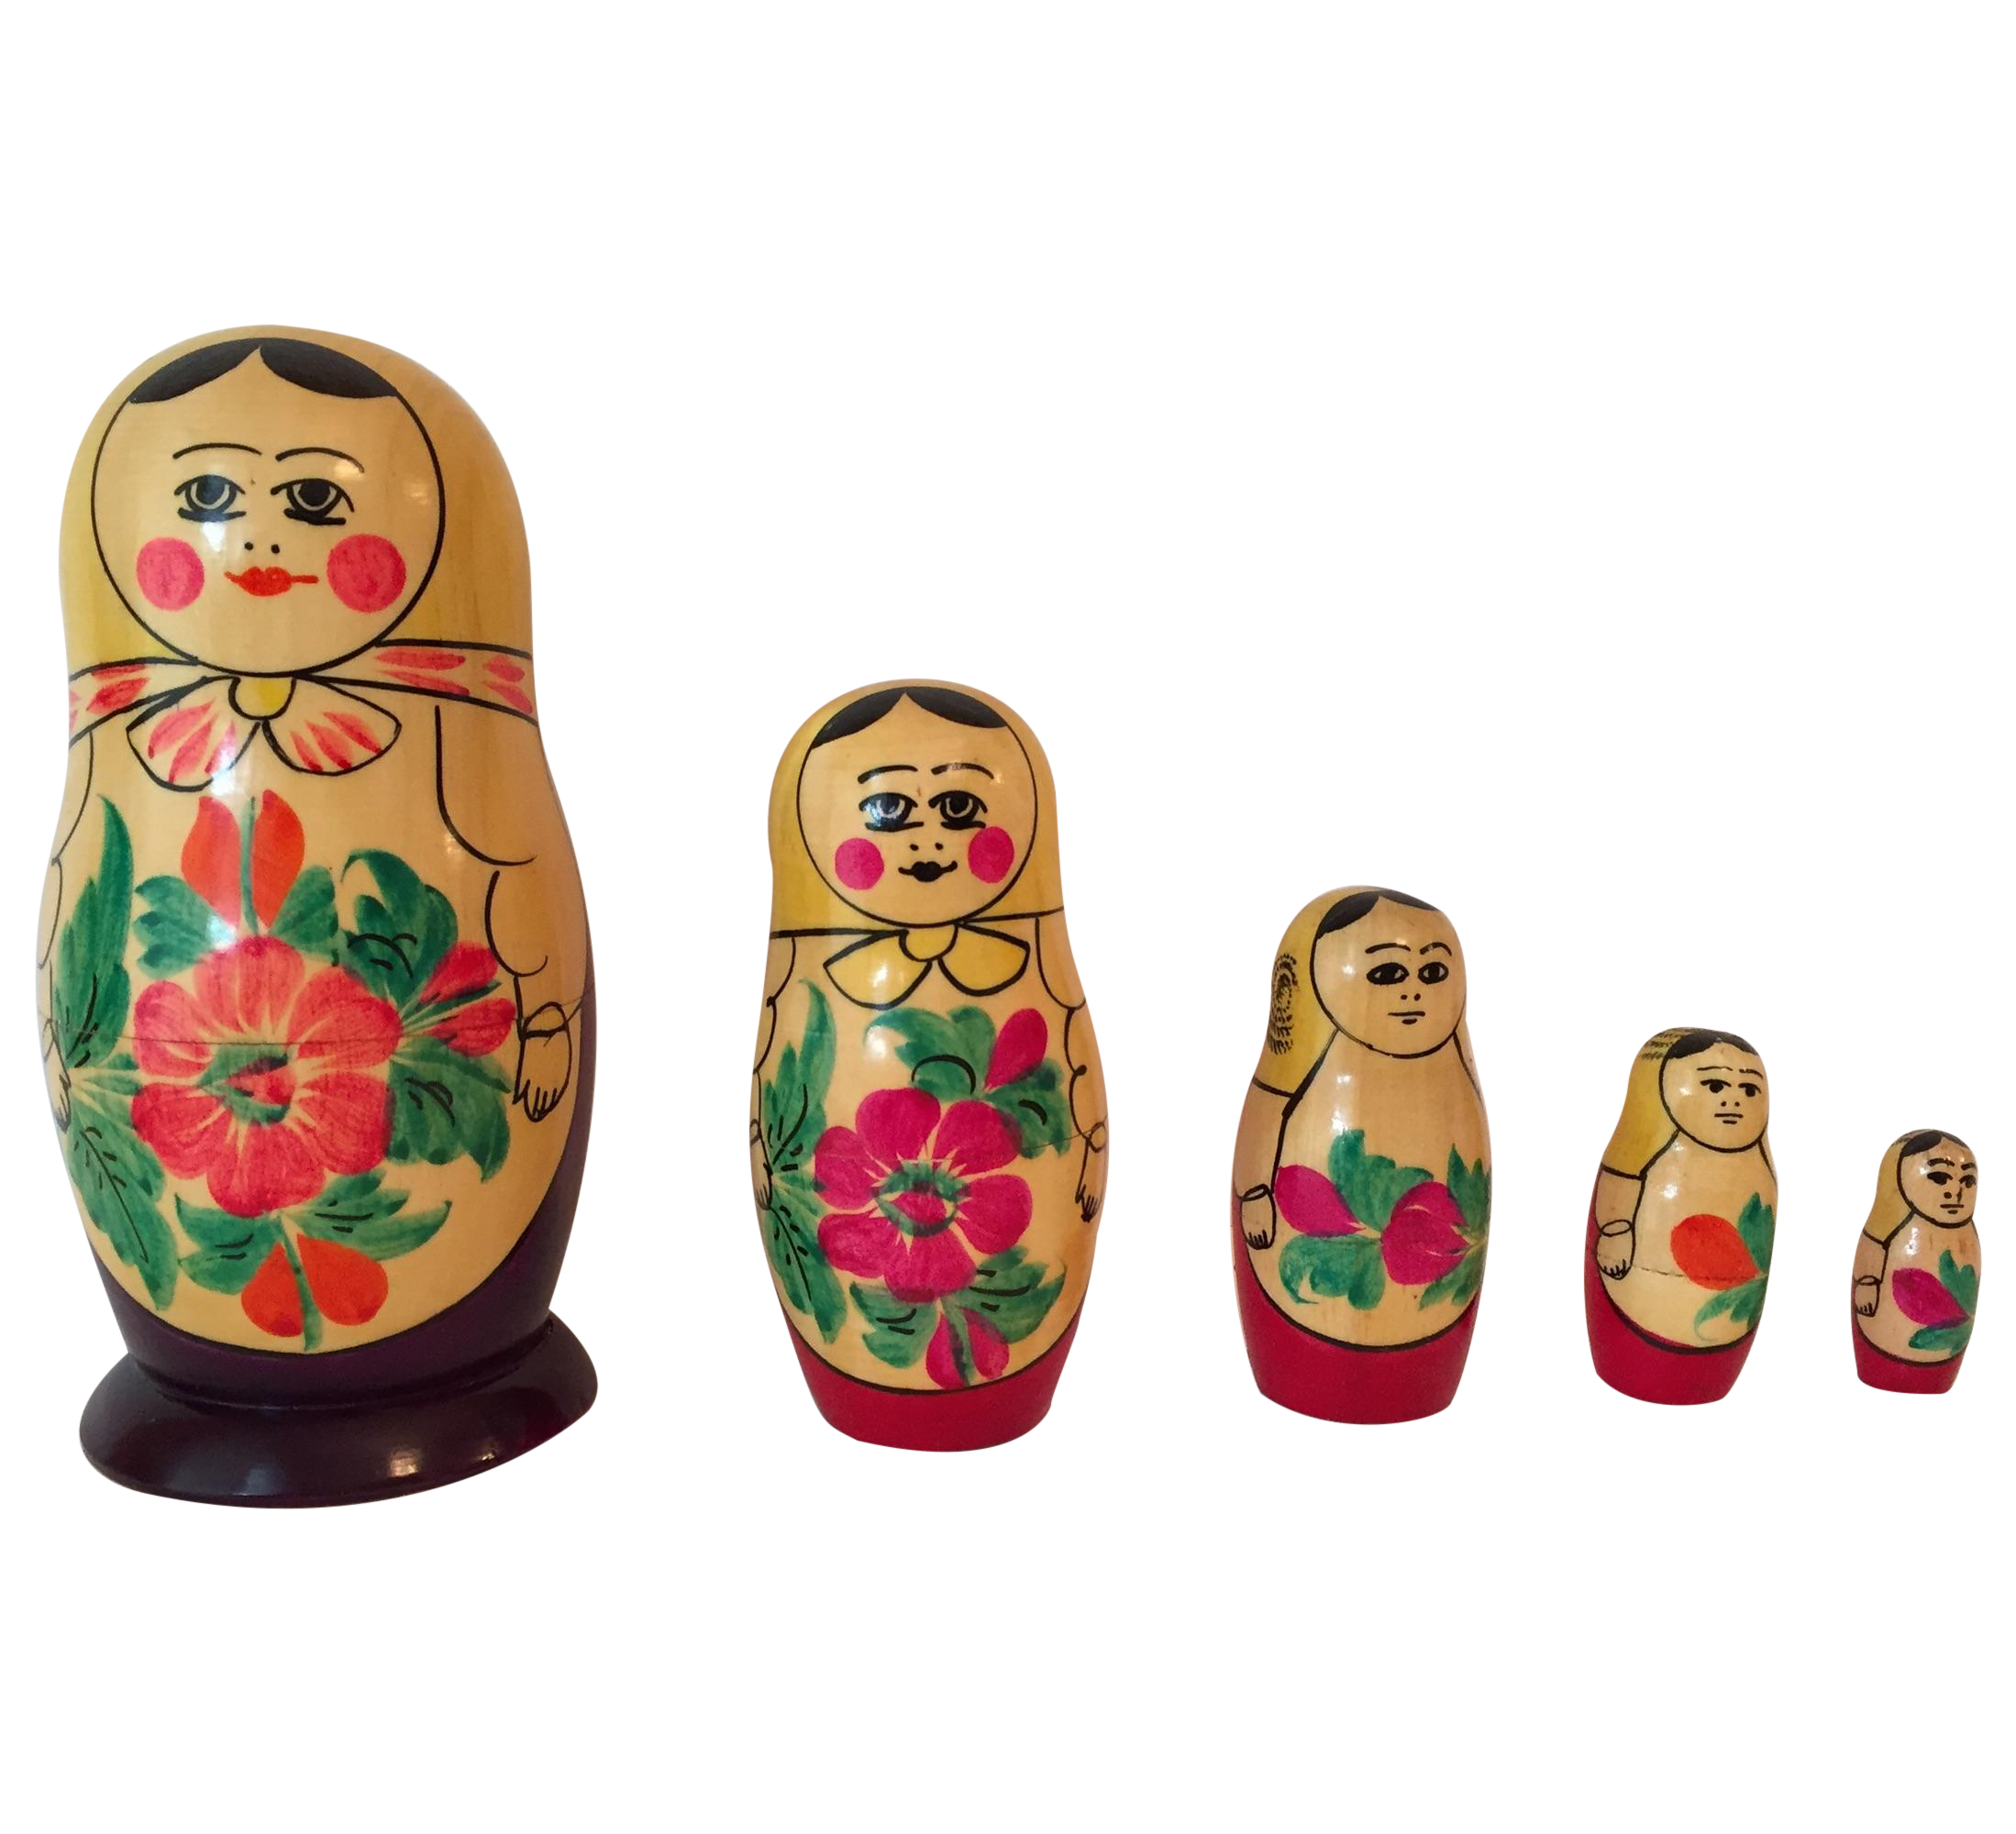 Matryoshka png images free. Dolls clipart doll russian